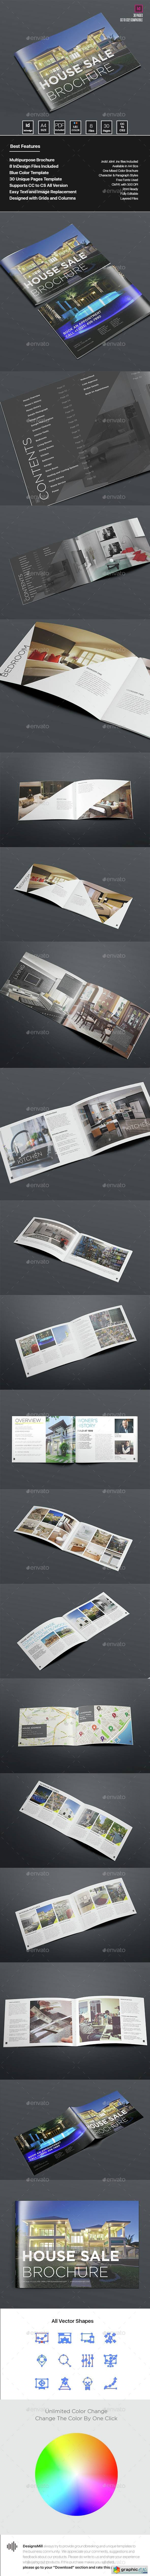 Real Estate and Property Sell Brochure